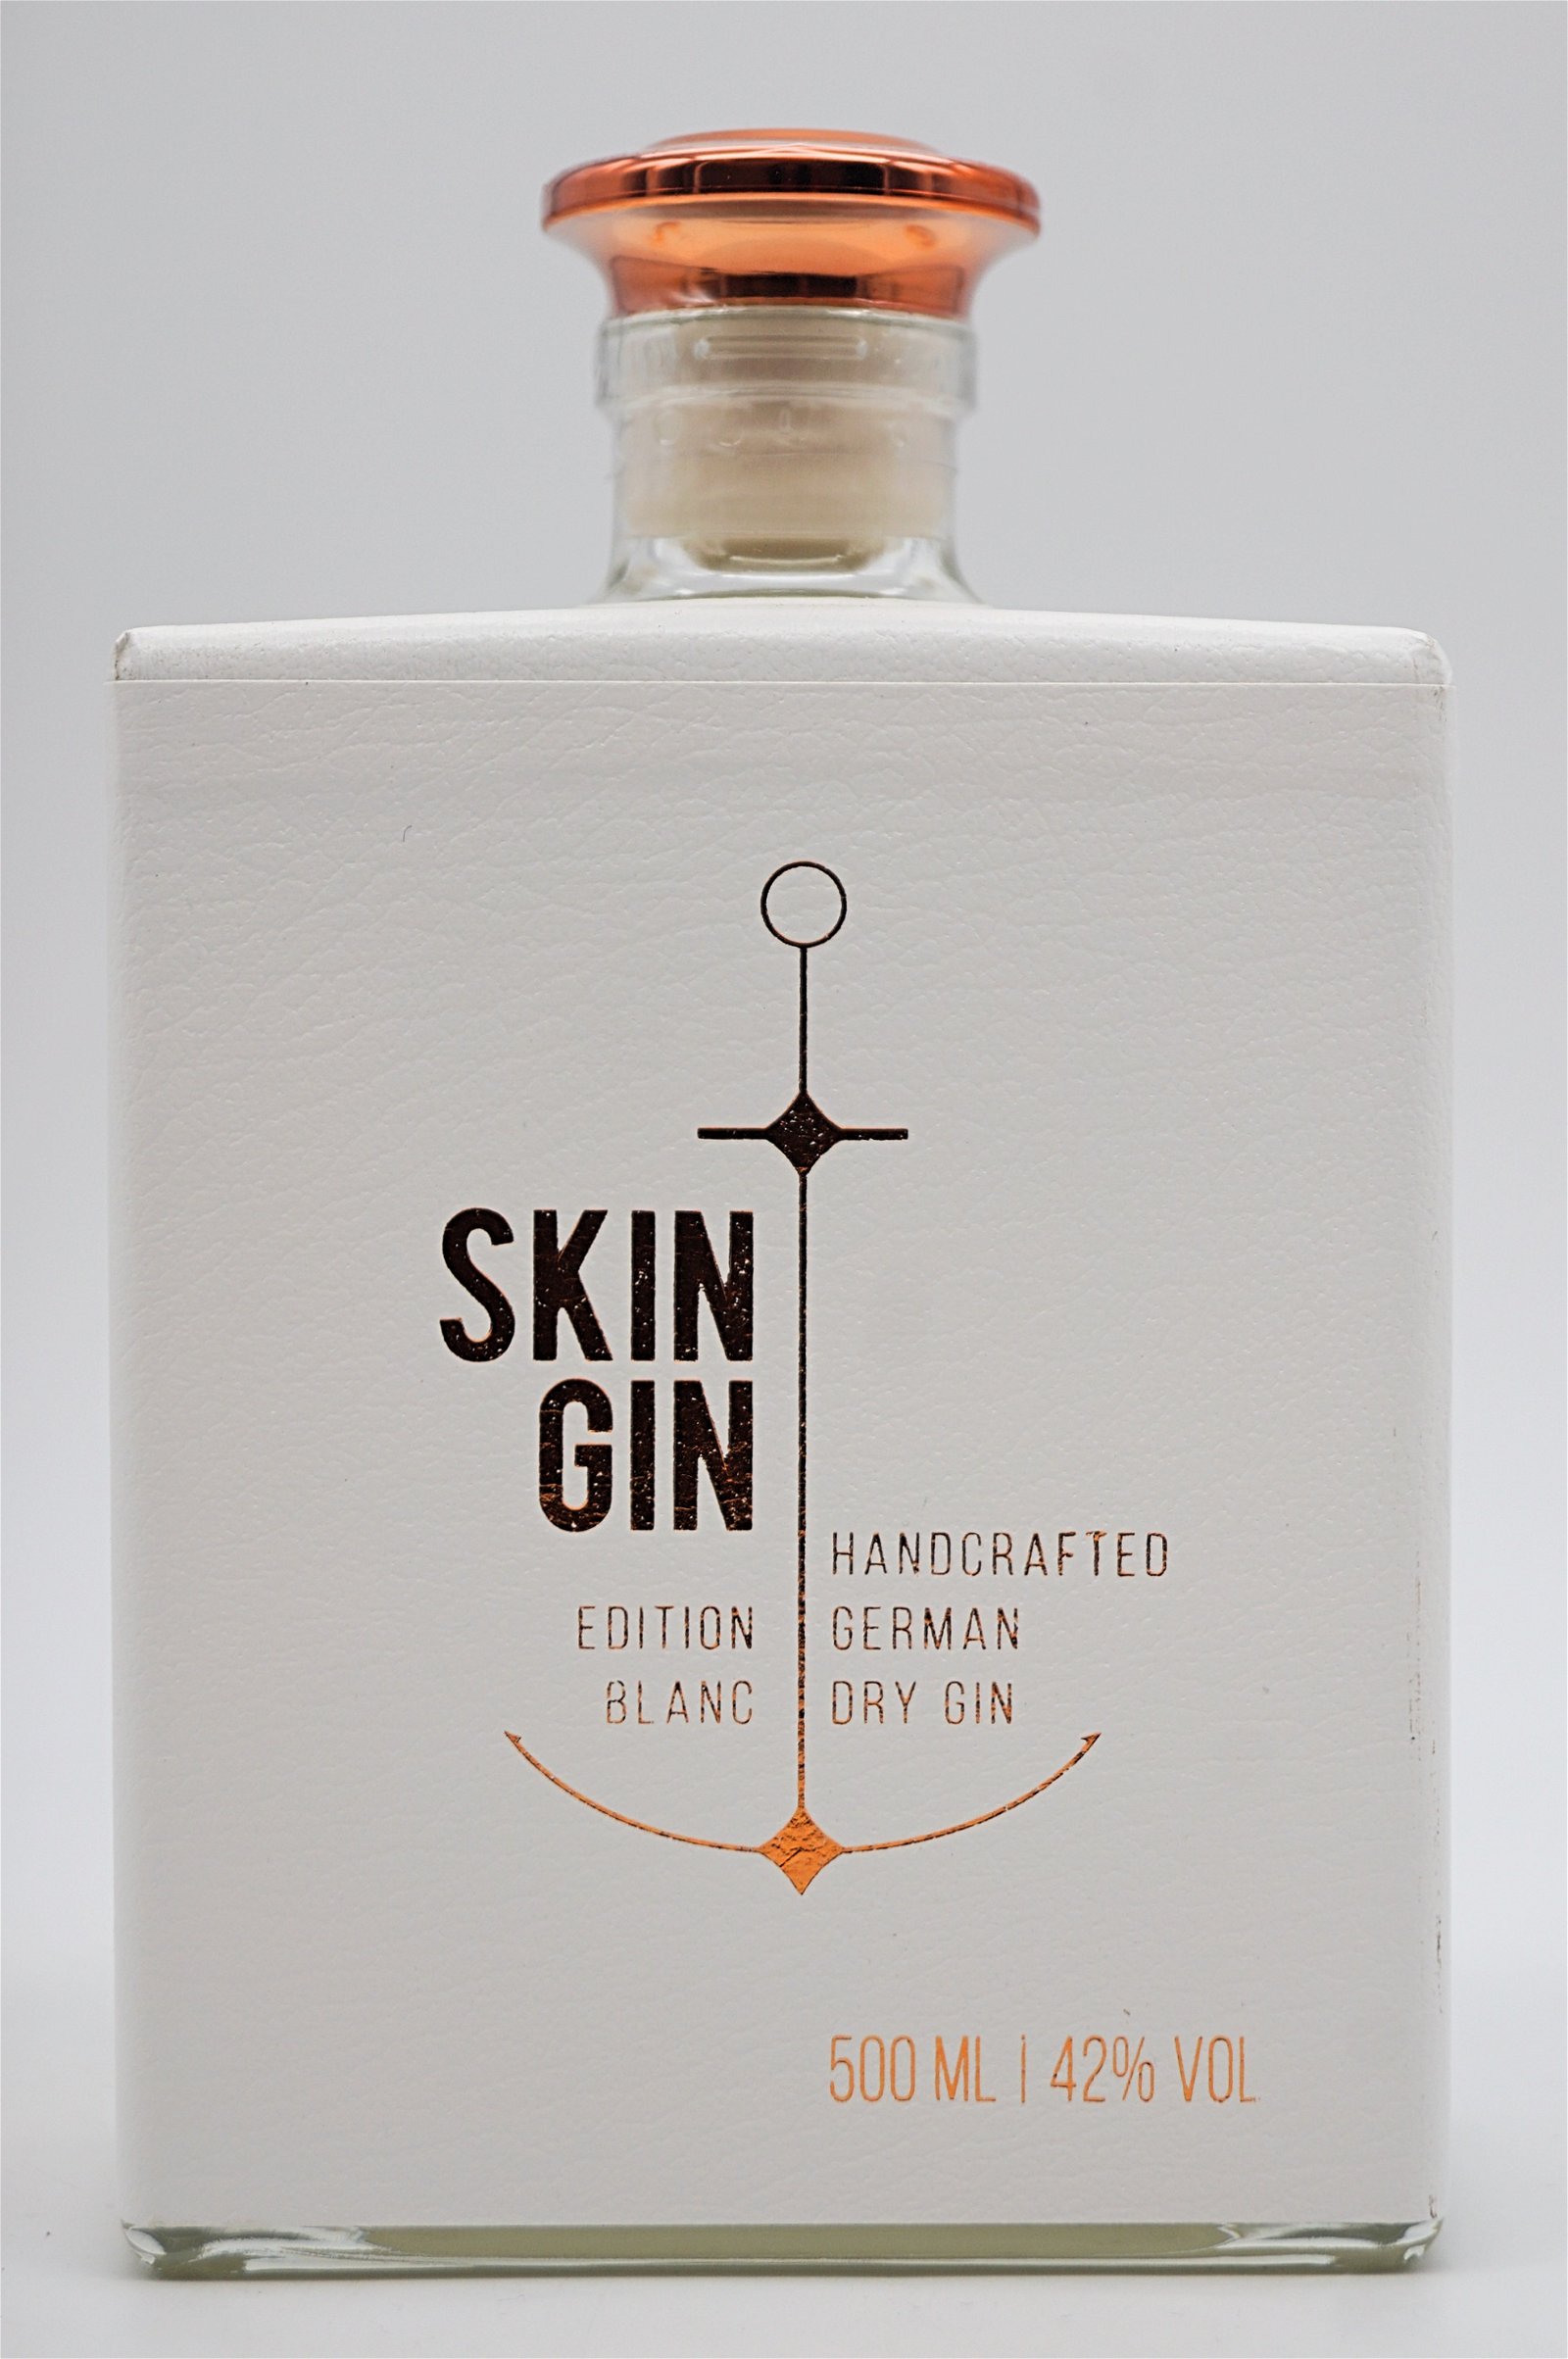 Skin Gin Edition Blanc Handcrafted German Dry Gin